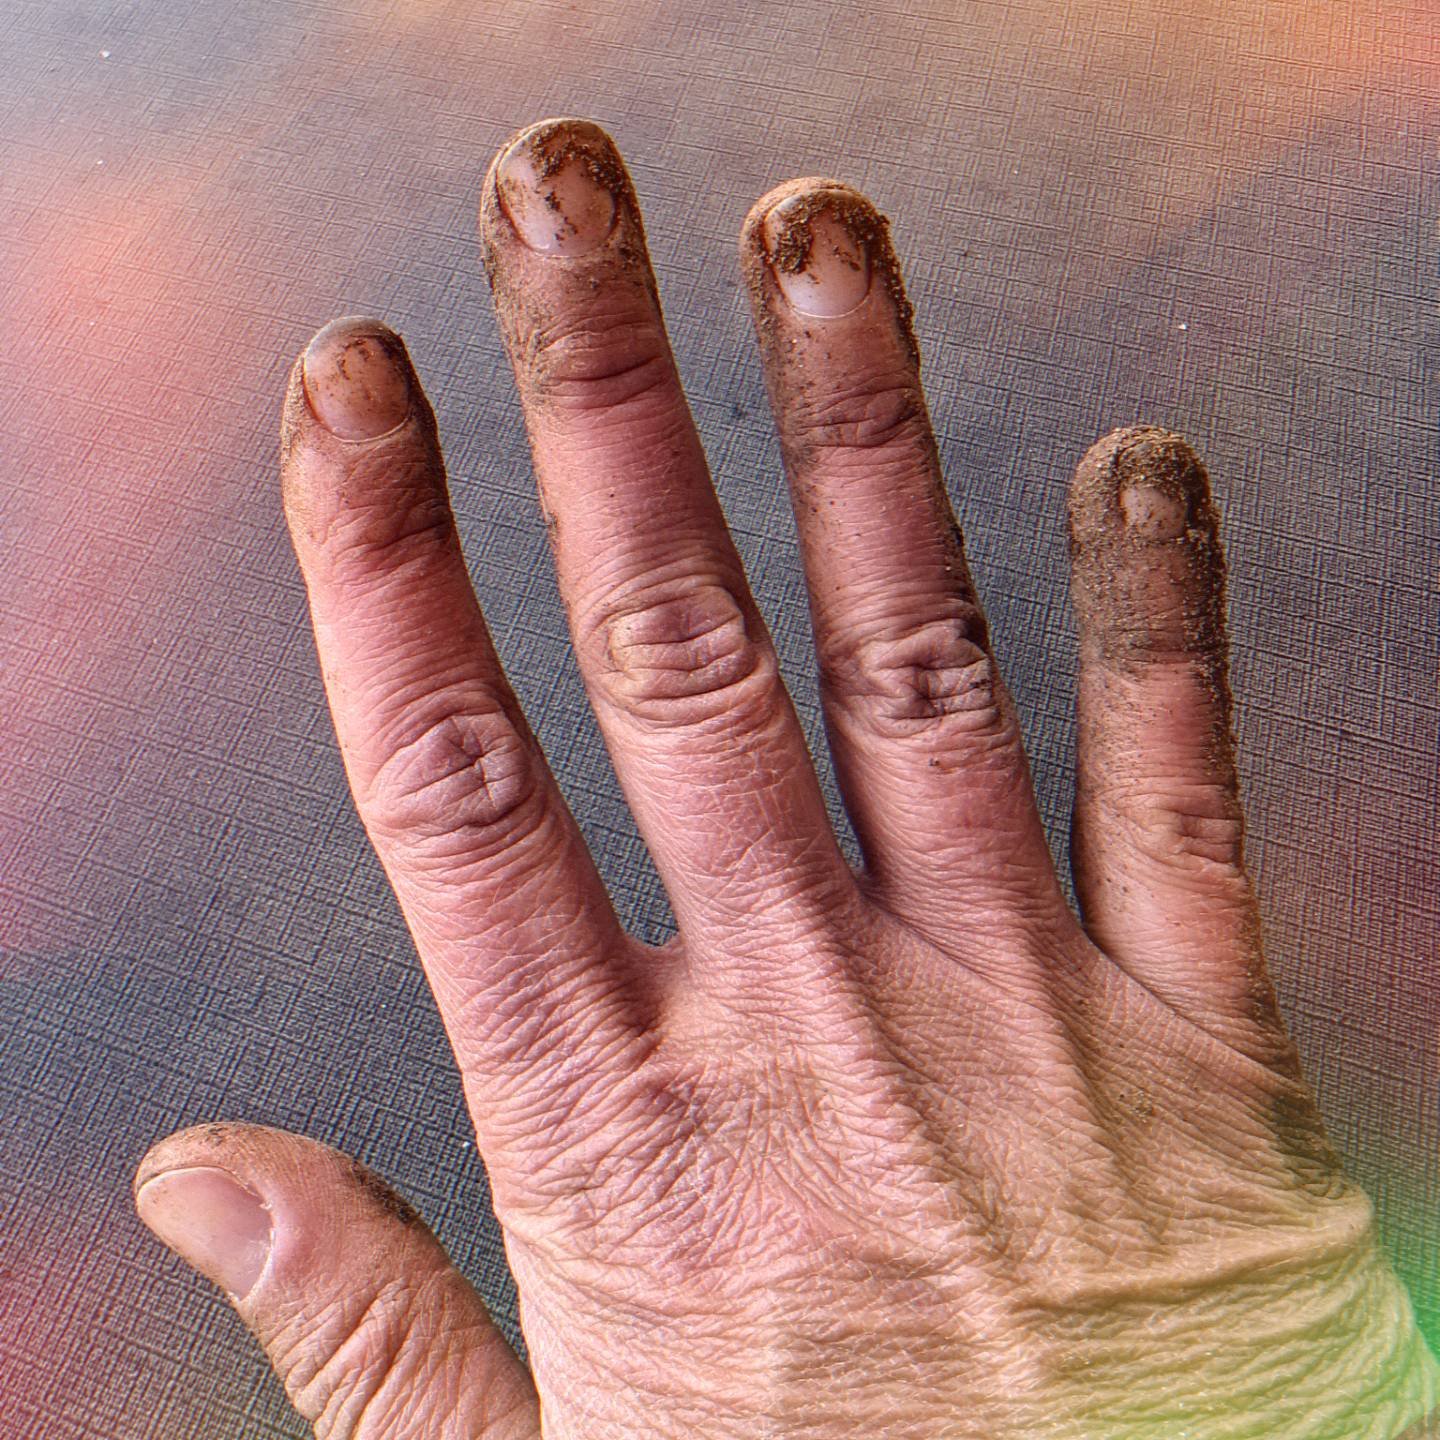 Anyone else rockin the #gardenfrenchmanicure these days? 

Planted gogi berries, autumn joy sedum, catnip, yarrow, hyssop, and coreopsis today. 

I really need to move somewhere where the growing season is longer than 2.5 months 🤣 

But I am meeting